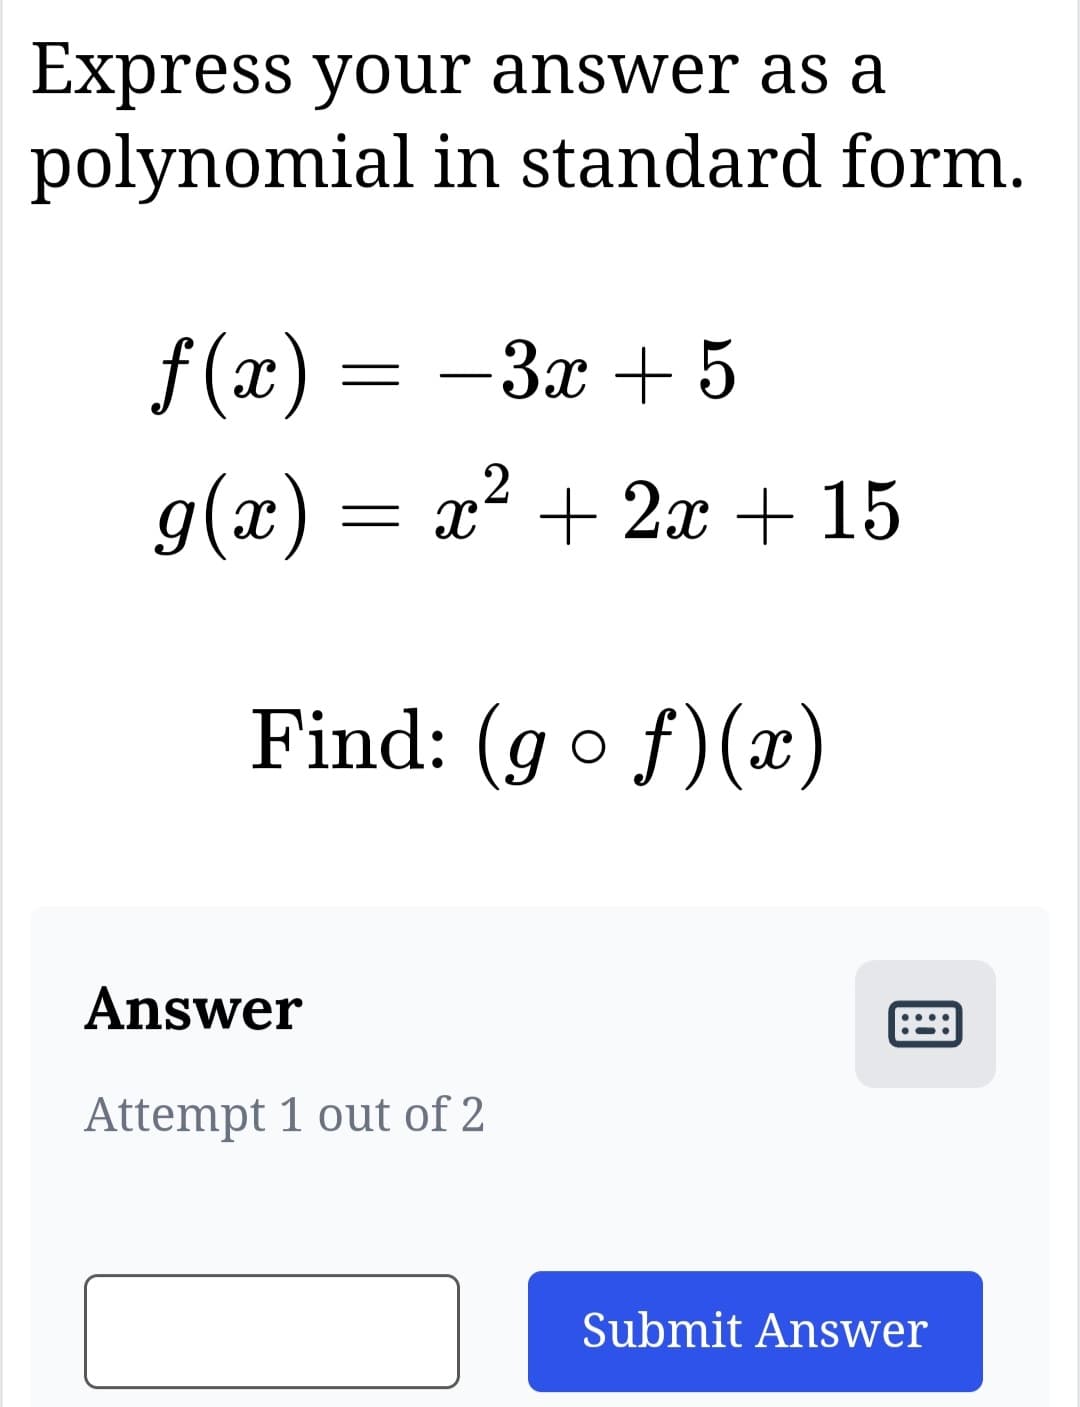 Express your answer as a
polynomial in standard form.
f(x) = -3x+5
2
g(x) = = x² + 2x + 15
Find: (gof)(x)
Answer
Attempt 1 out of 2
B
Submit Answer